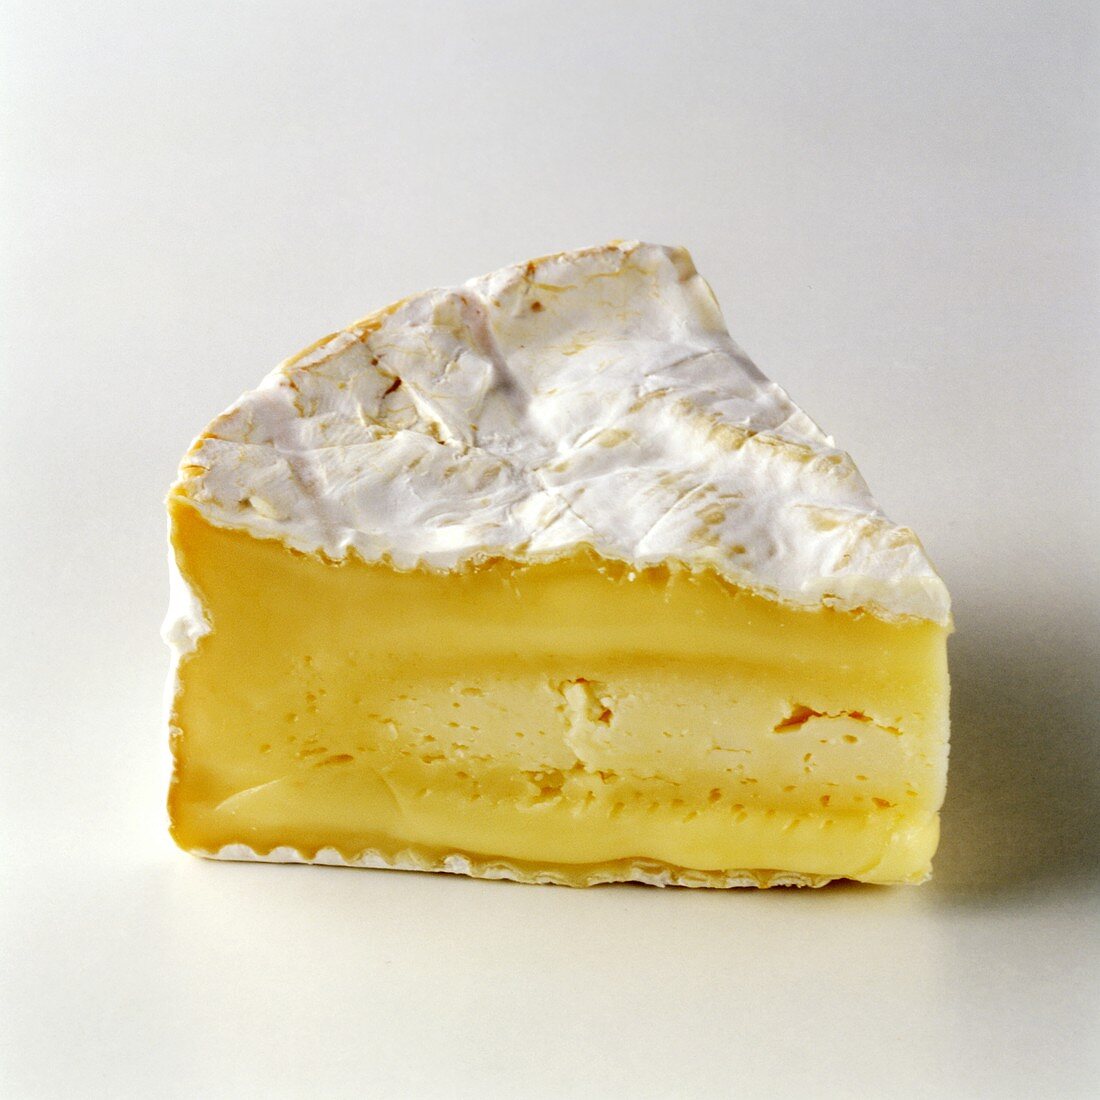 A Single Wedge of Camembert Cheese